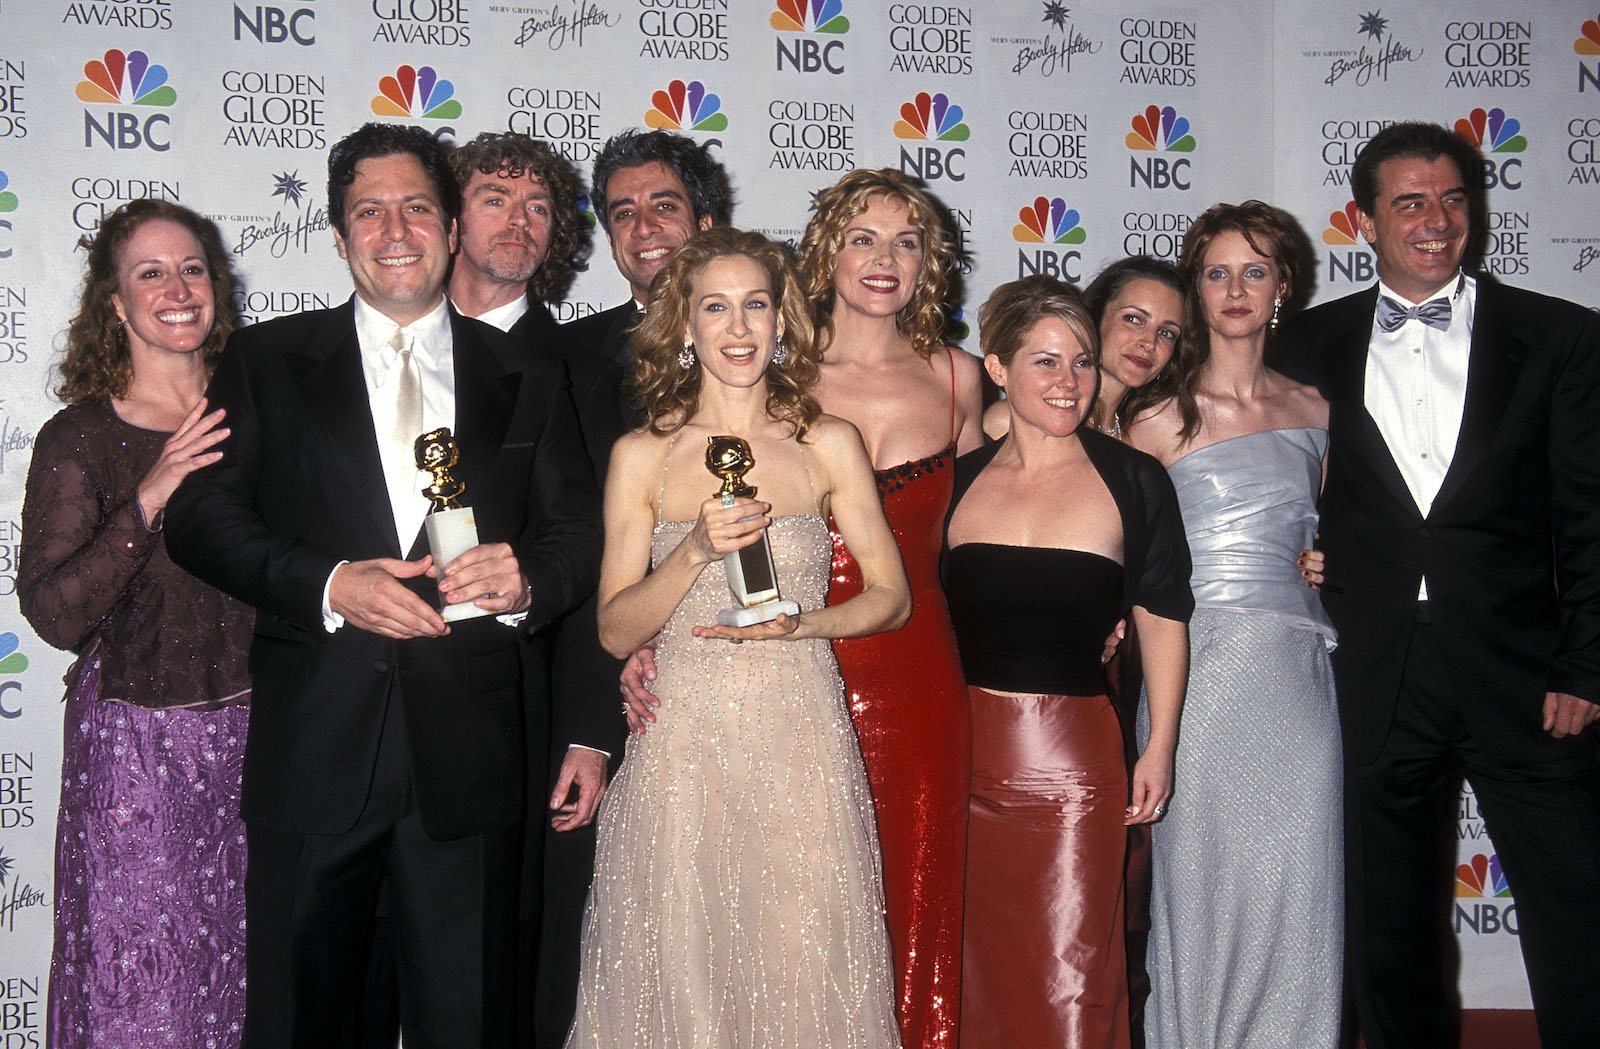 Cast and crew of Sex and the City standing with 2 Golden Globe awards in 2000.  